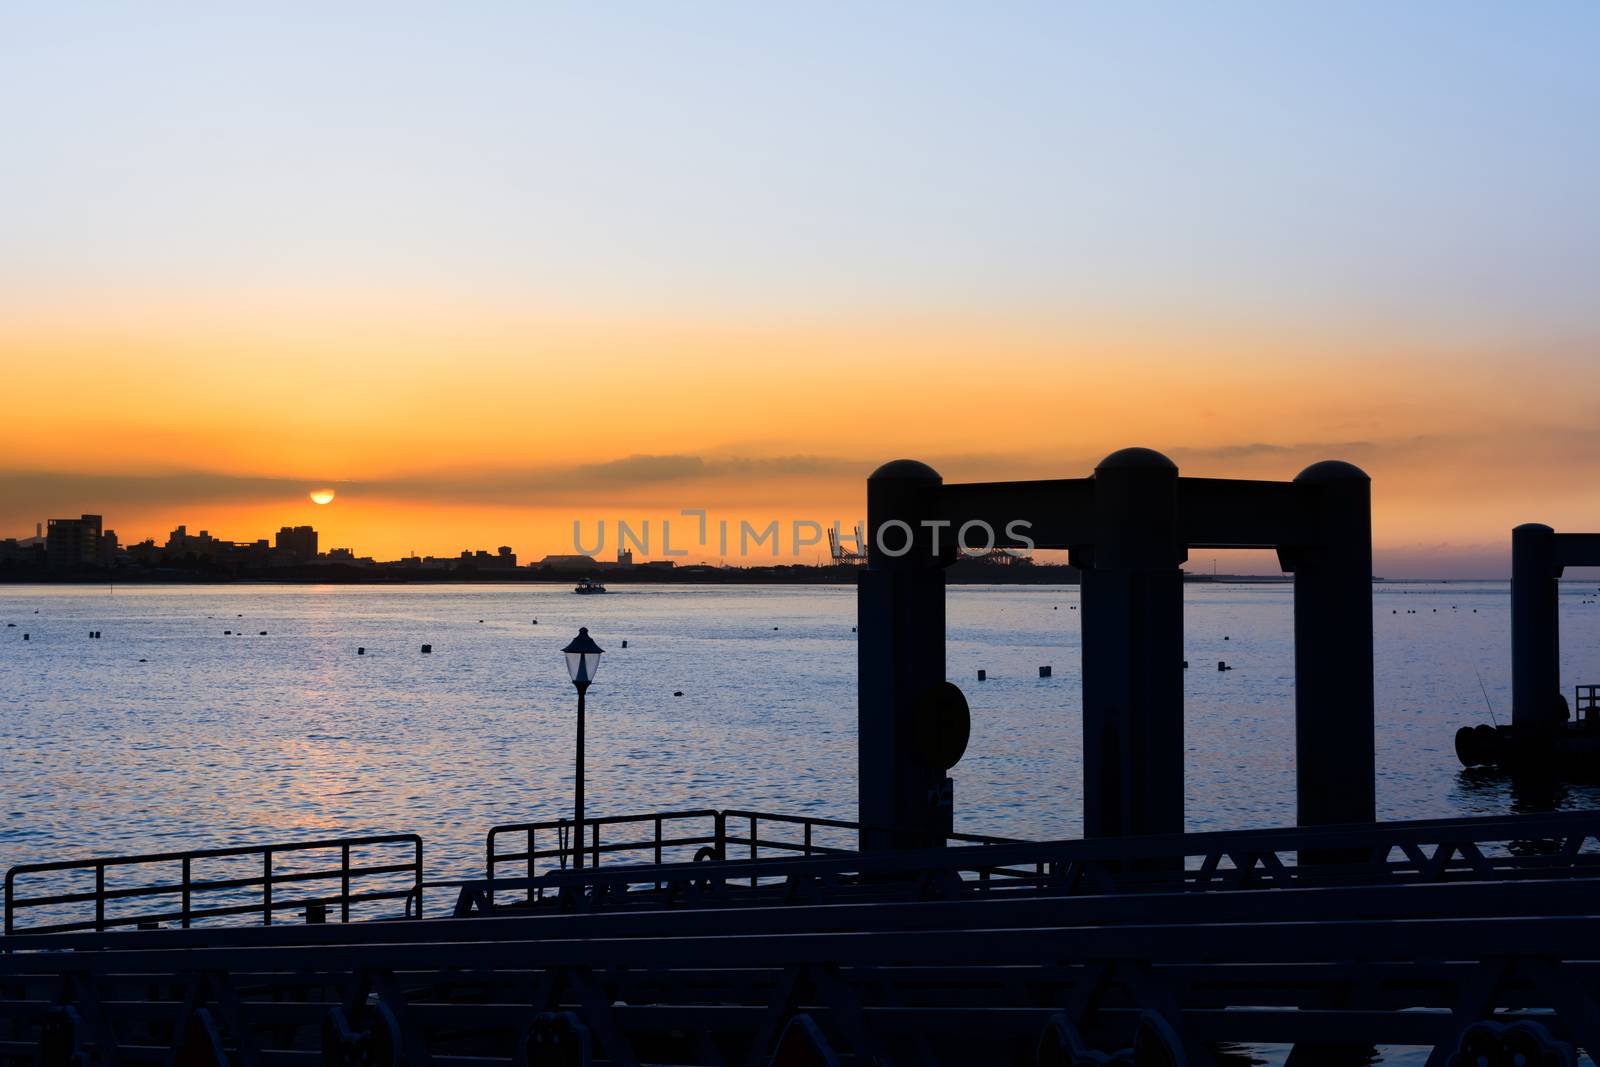 Tamsui scenery with dock and boat in the sunset, Taipei, Taiwan, Asia.